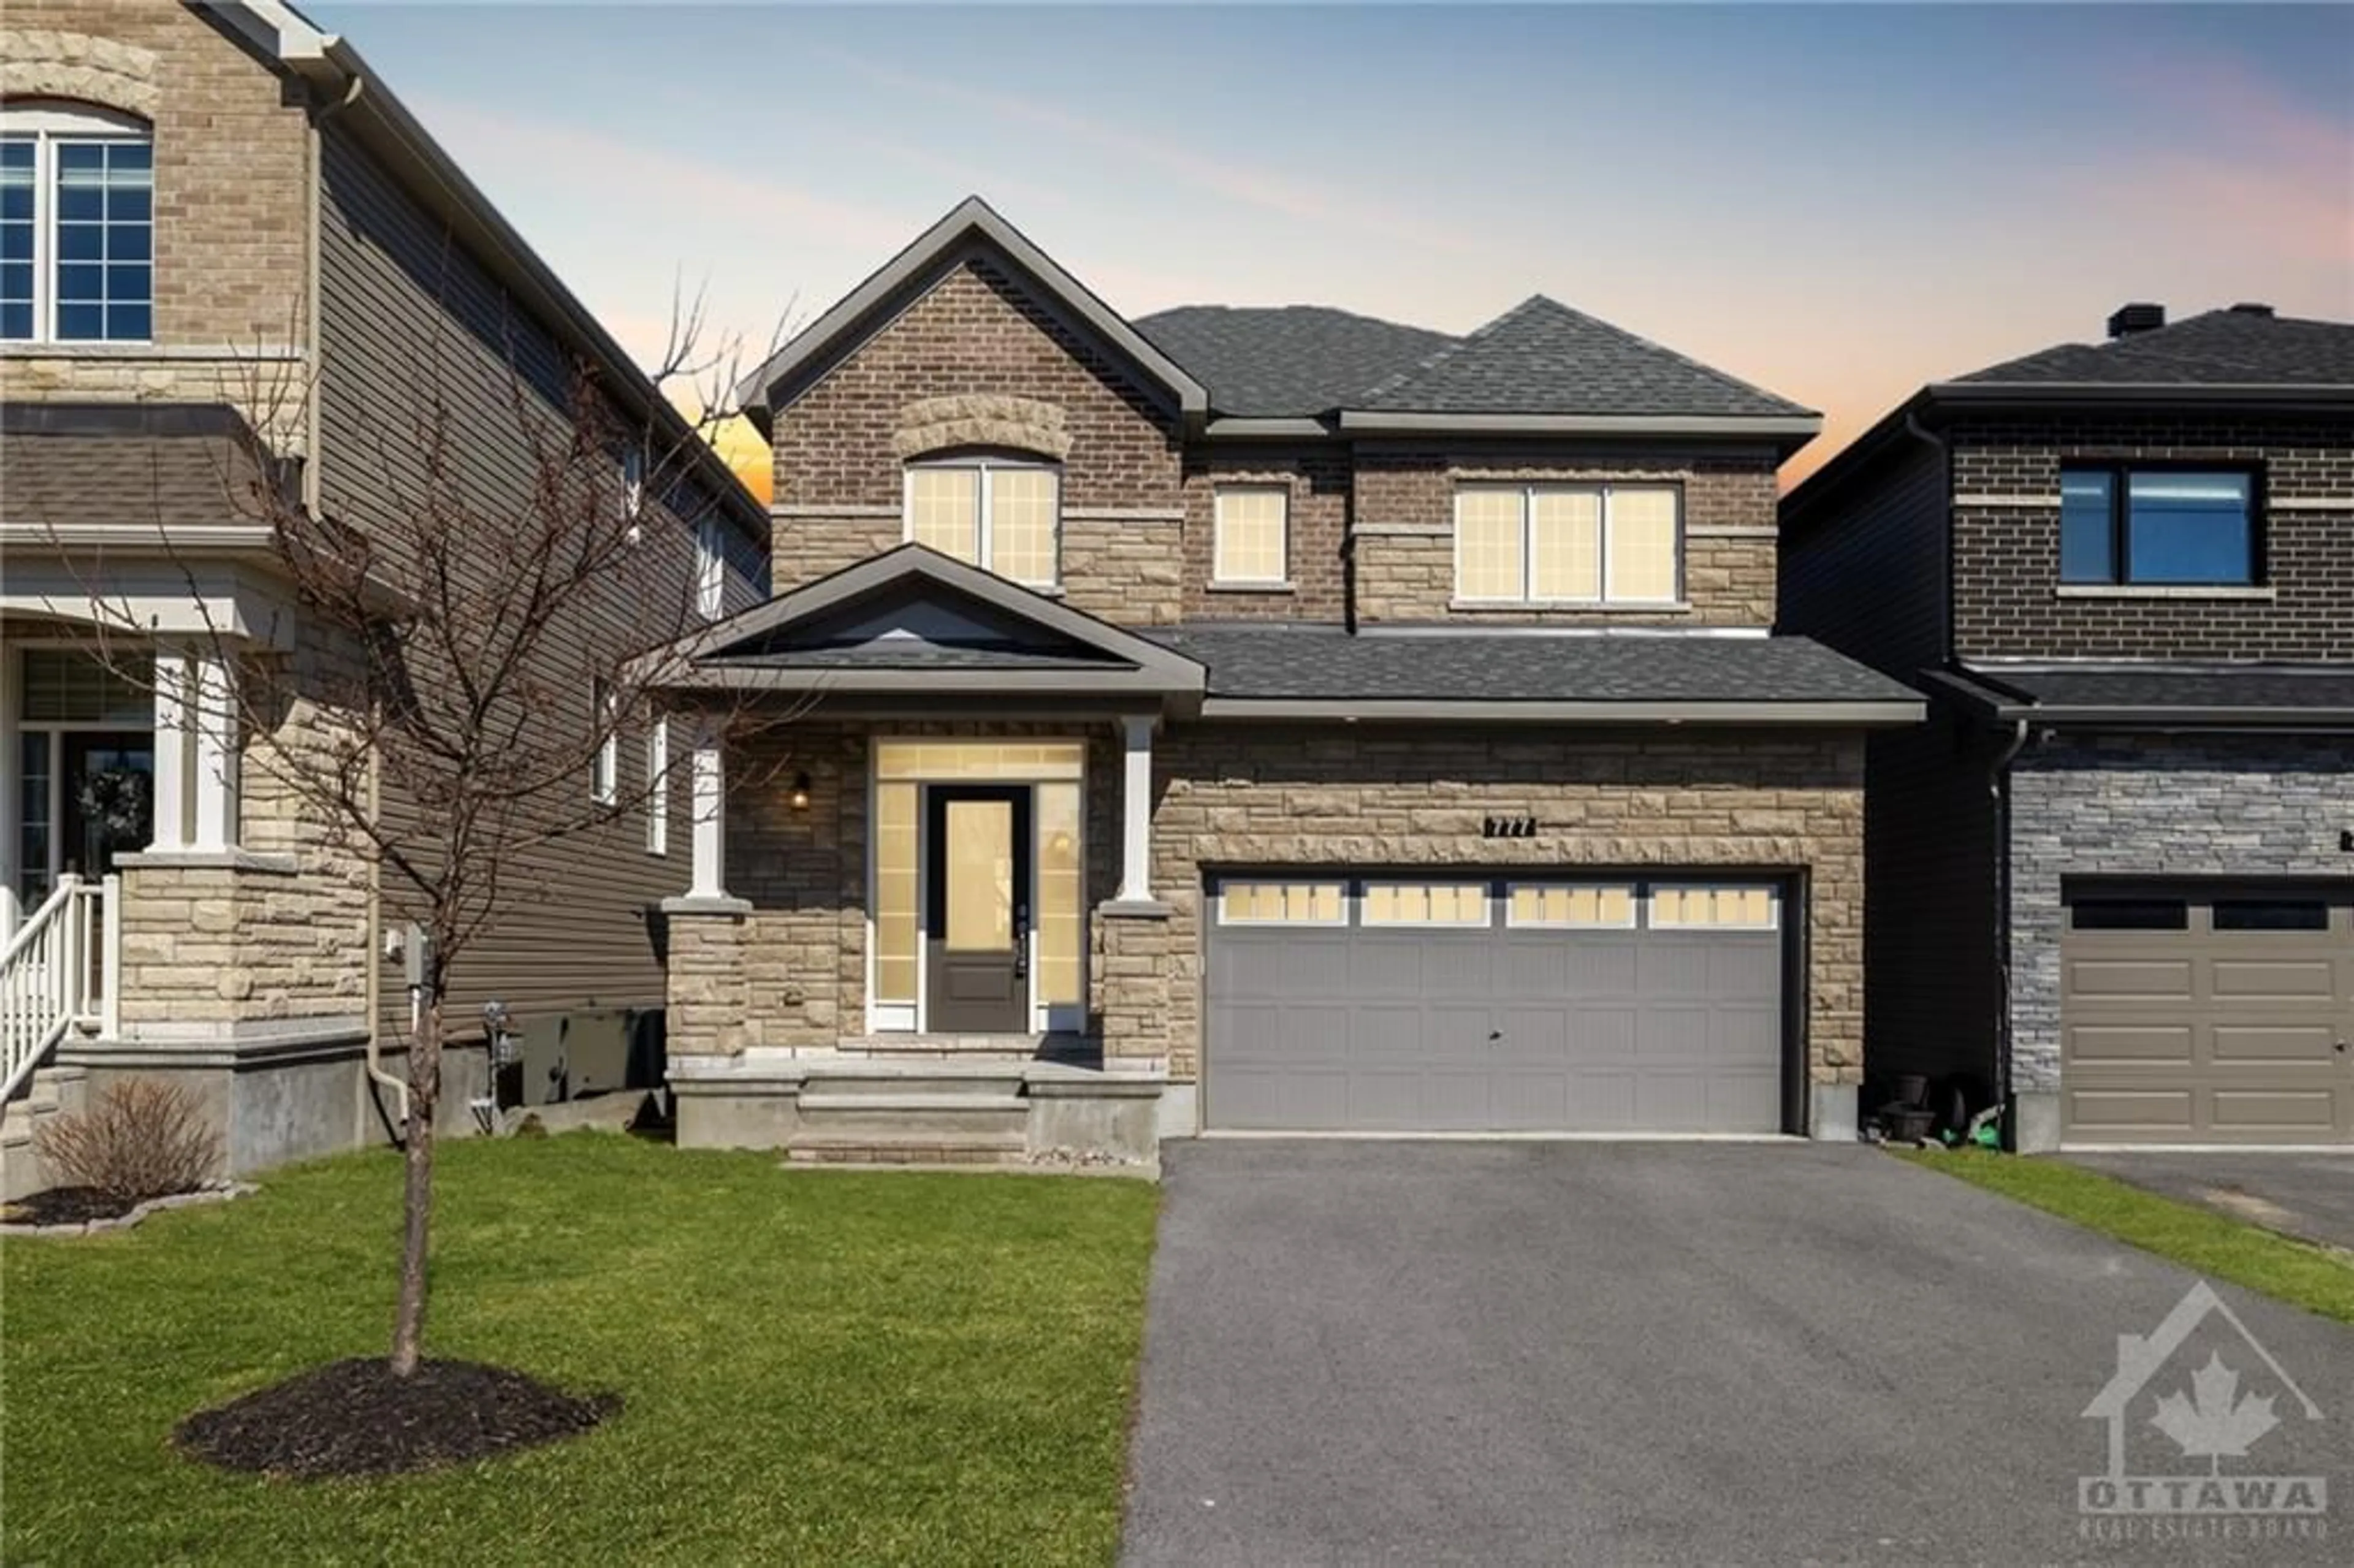 Home with brick exterior material for 777 SAMANTHA EASTOP Ave, Ottawa Ontario K2S 0Z9